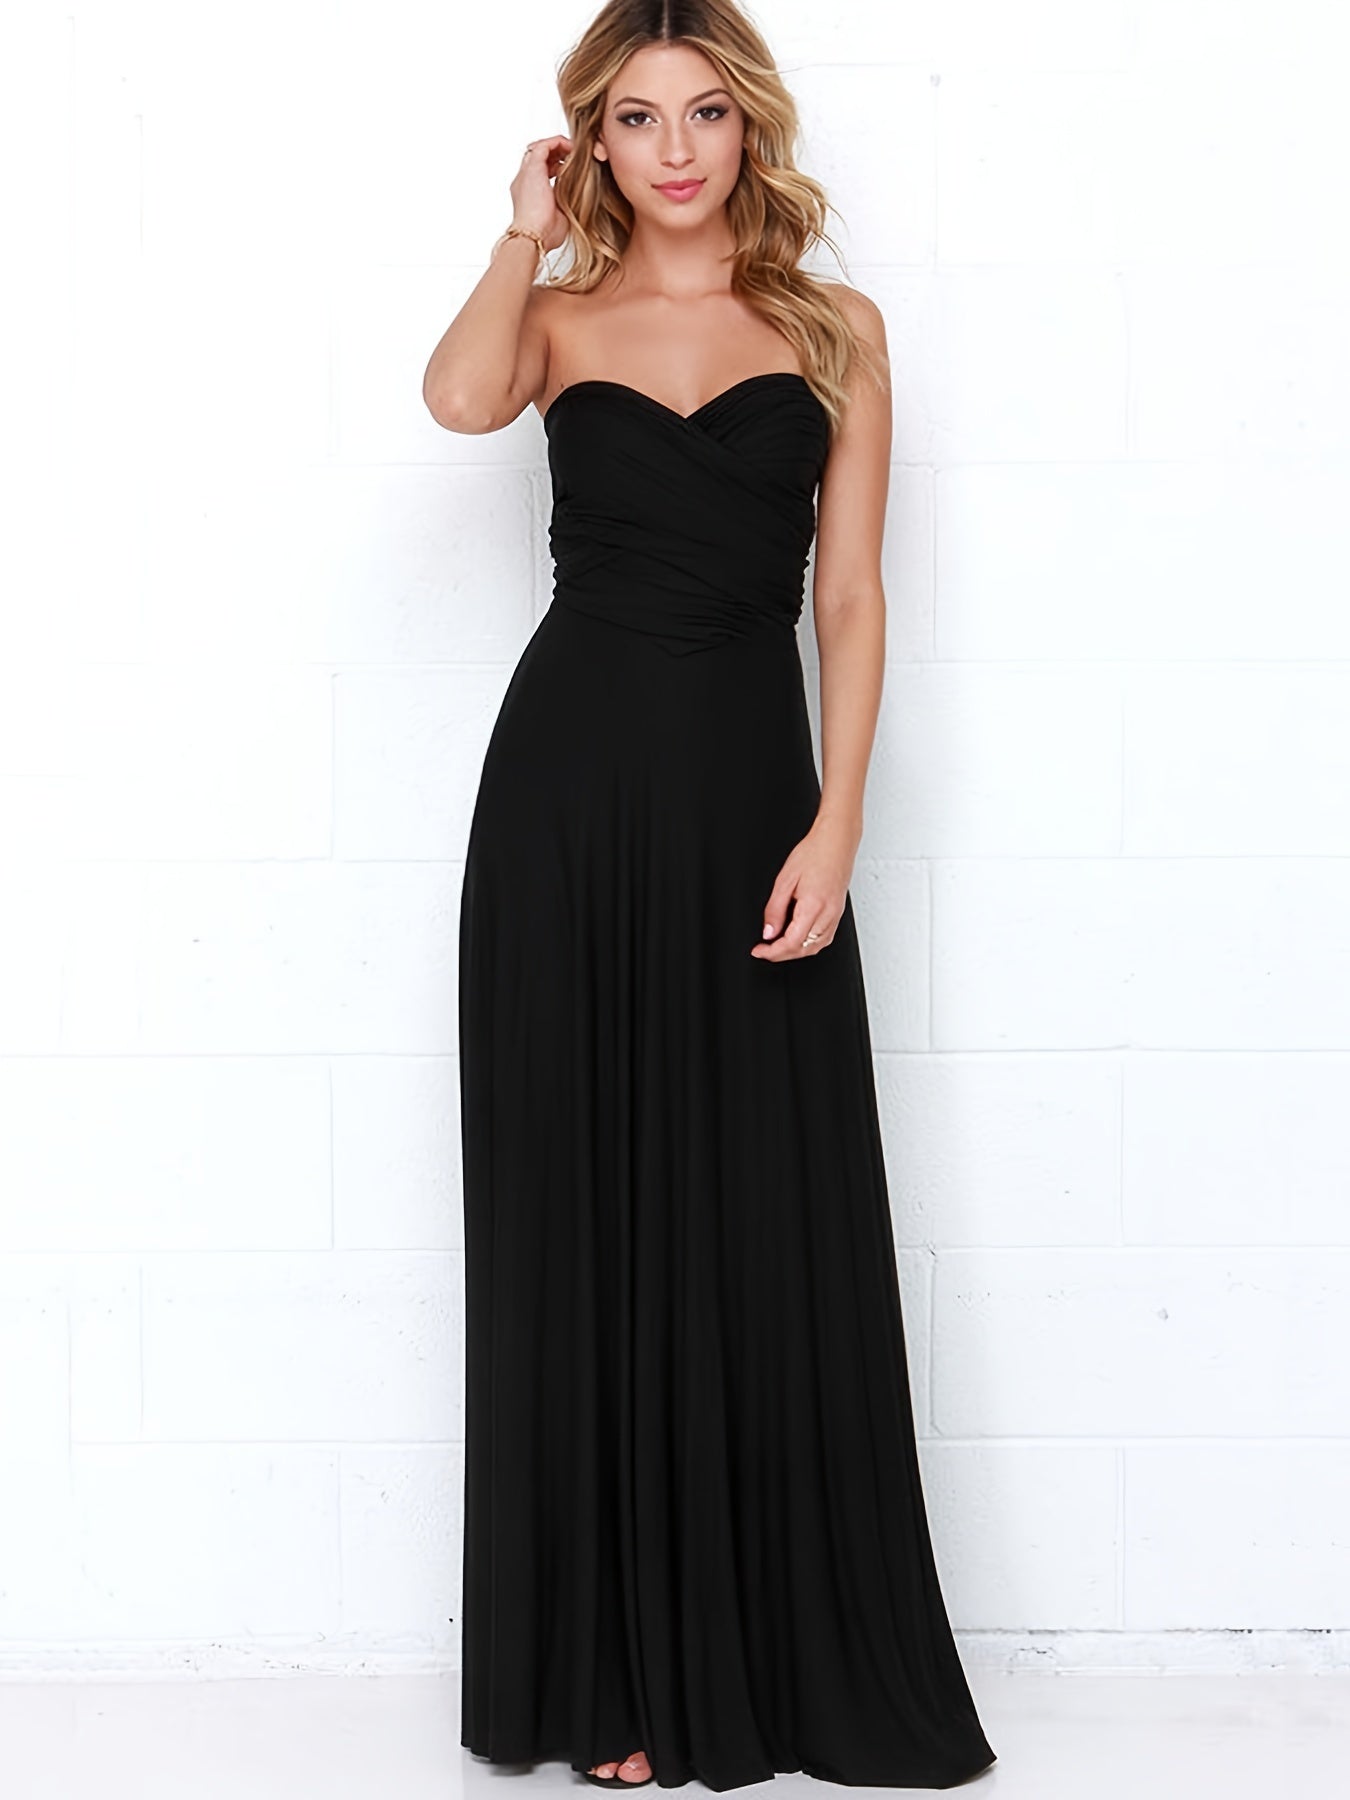 Empower Your Style with Our Elegant Maxi Dresses for Women